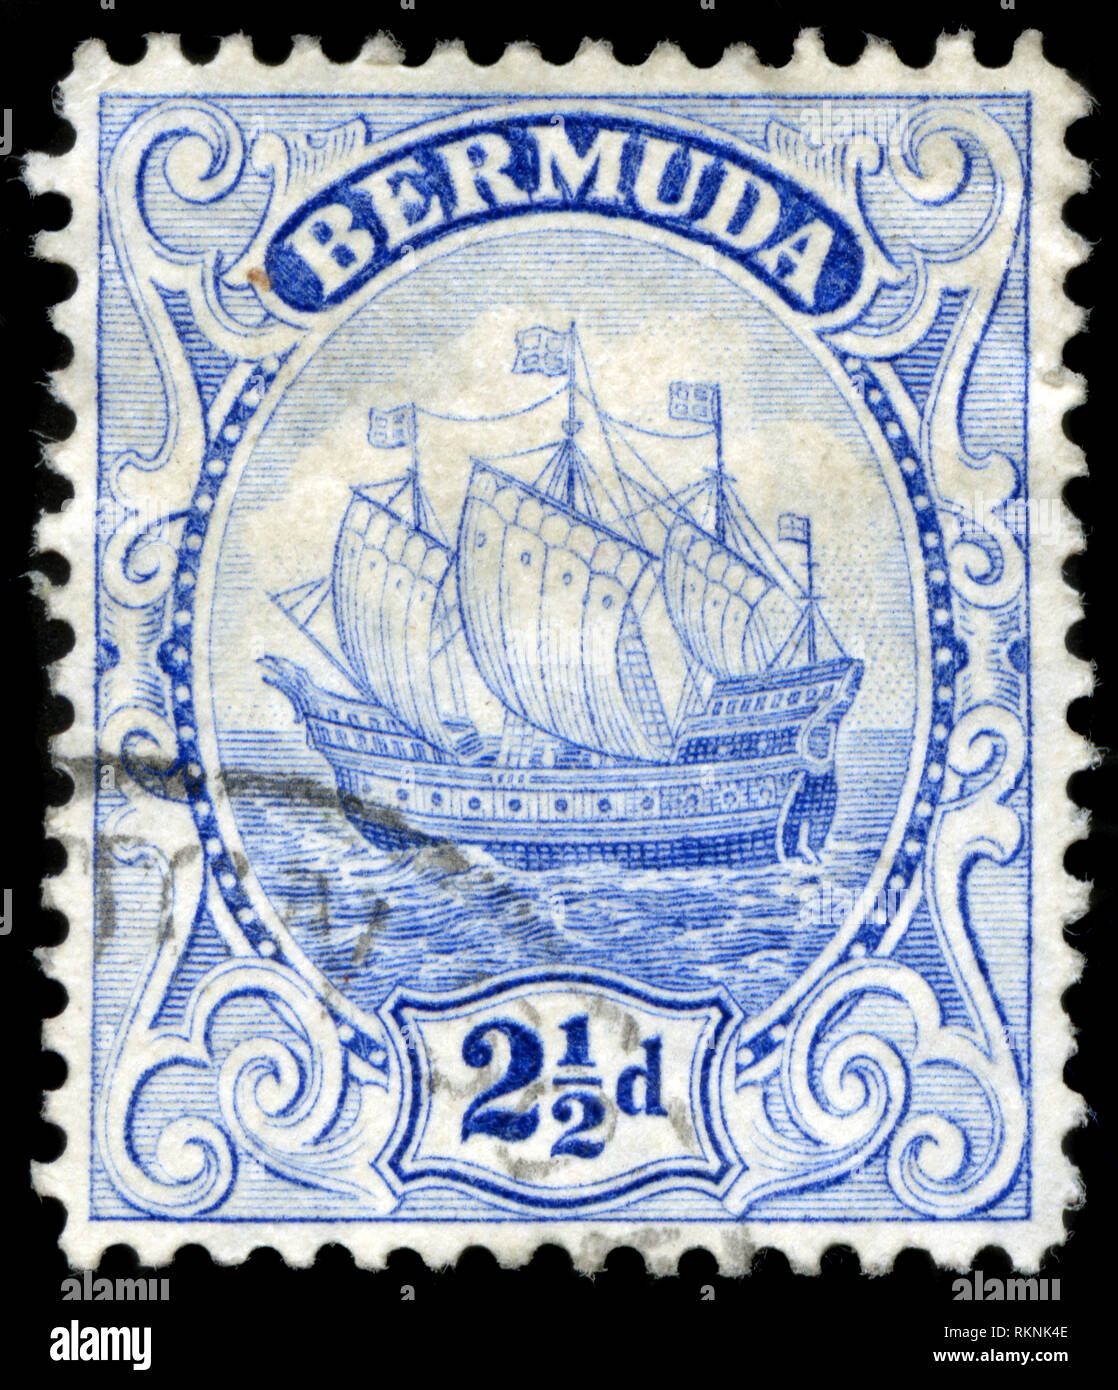 Postage stamp from Bermuda in the Definitives series issued in 1912 Stock Photo